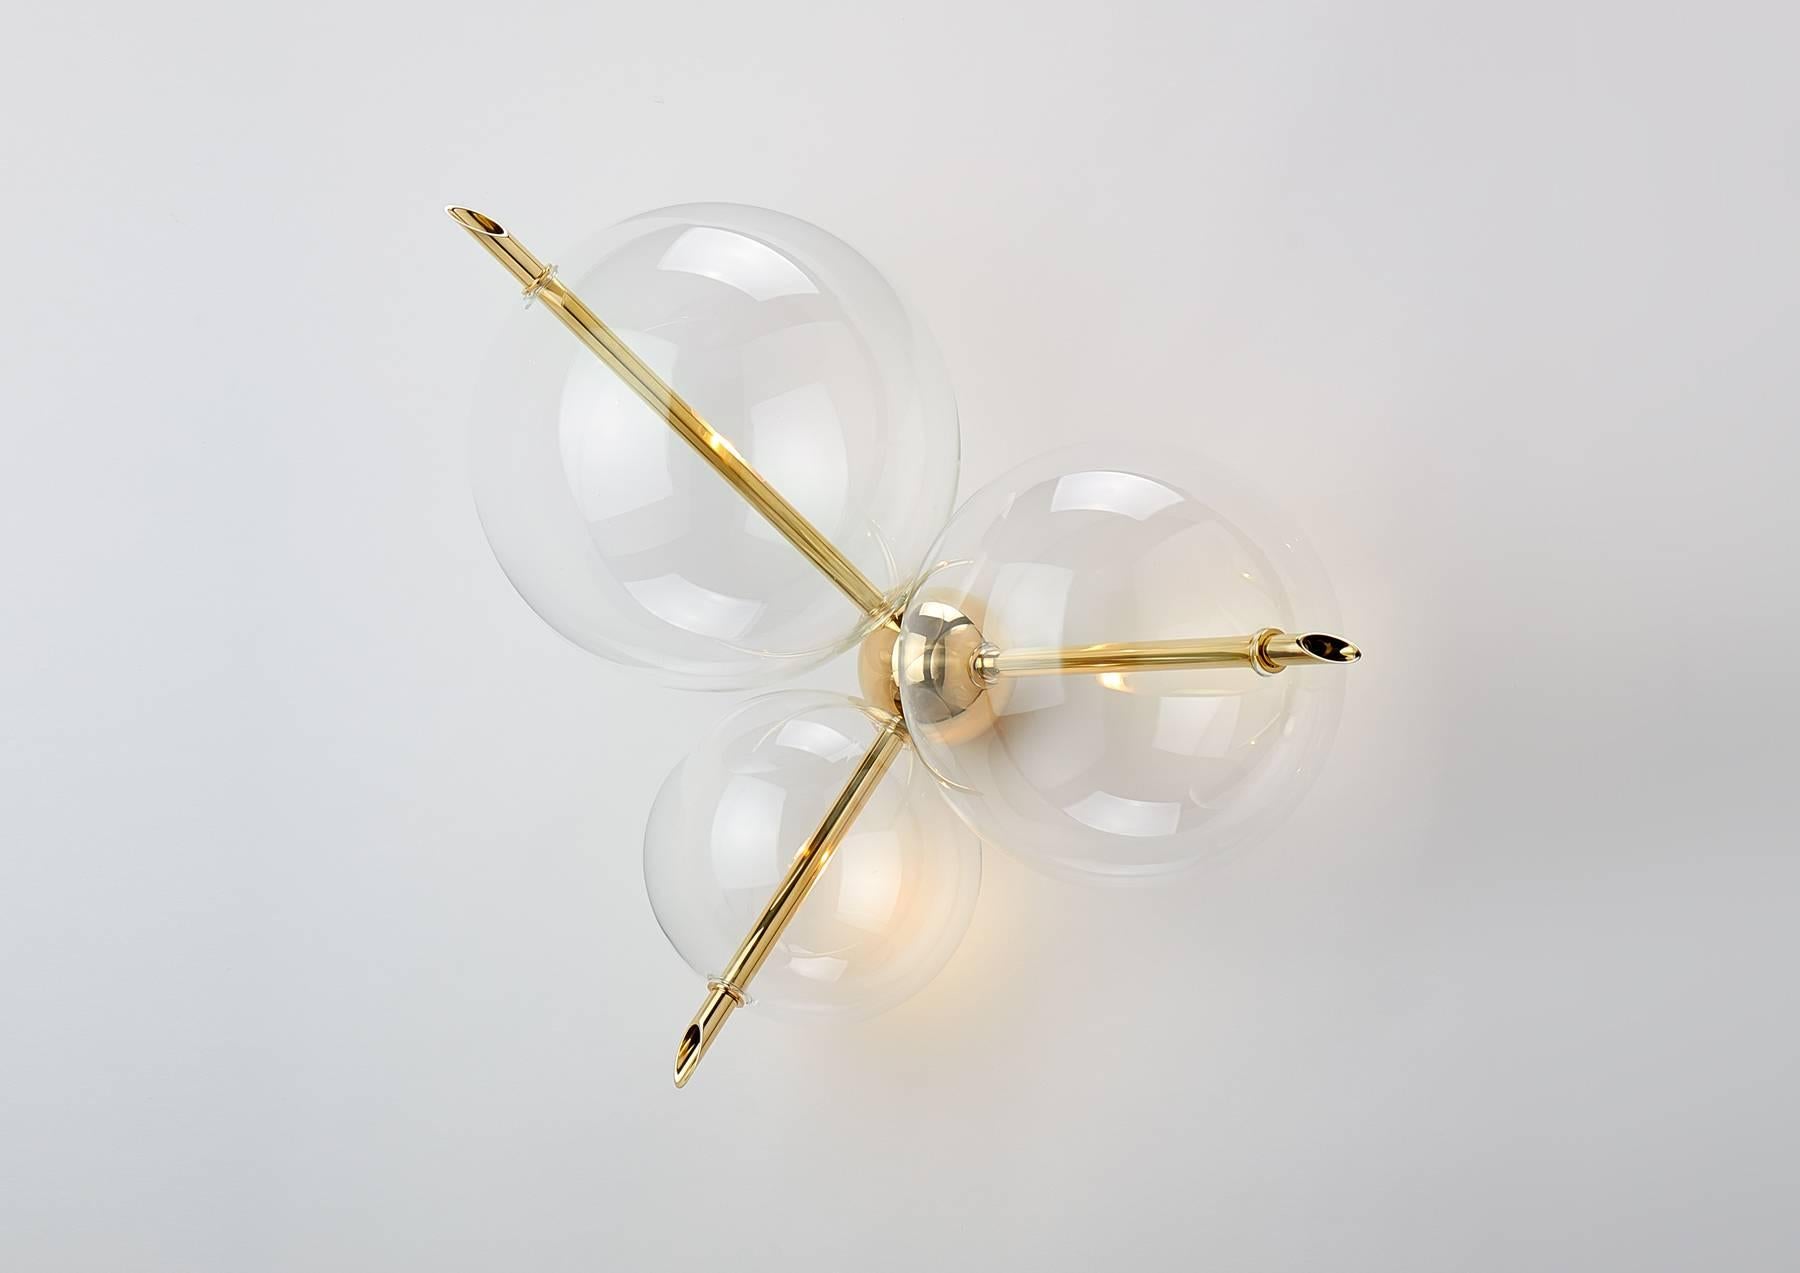 Lune Three lights Contemporary Ceiling Mount / Sconce Polished Brass Blown Glass In New Condition For Sale In Reggio Emilia, IT